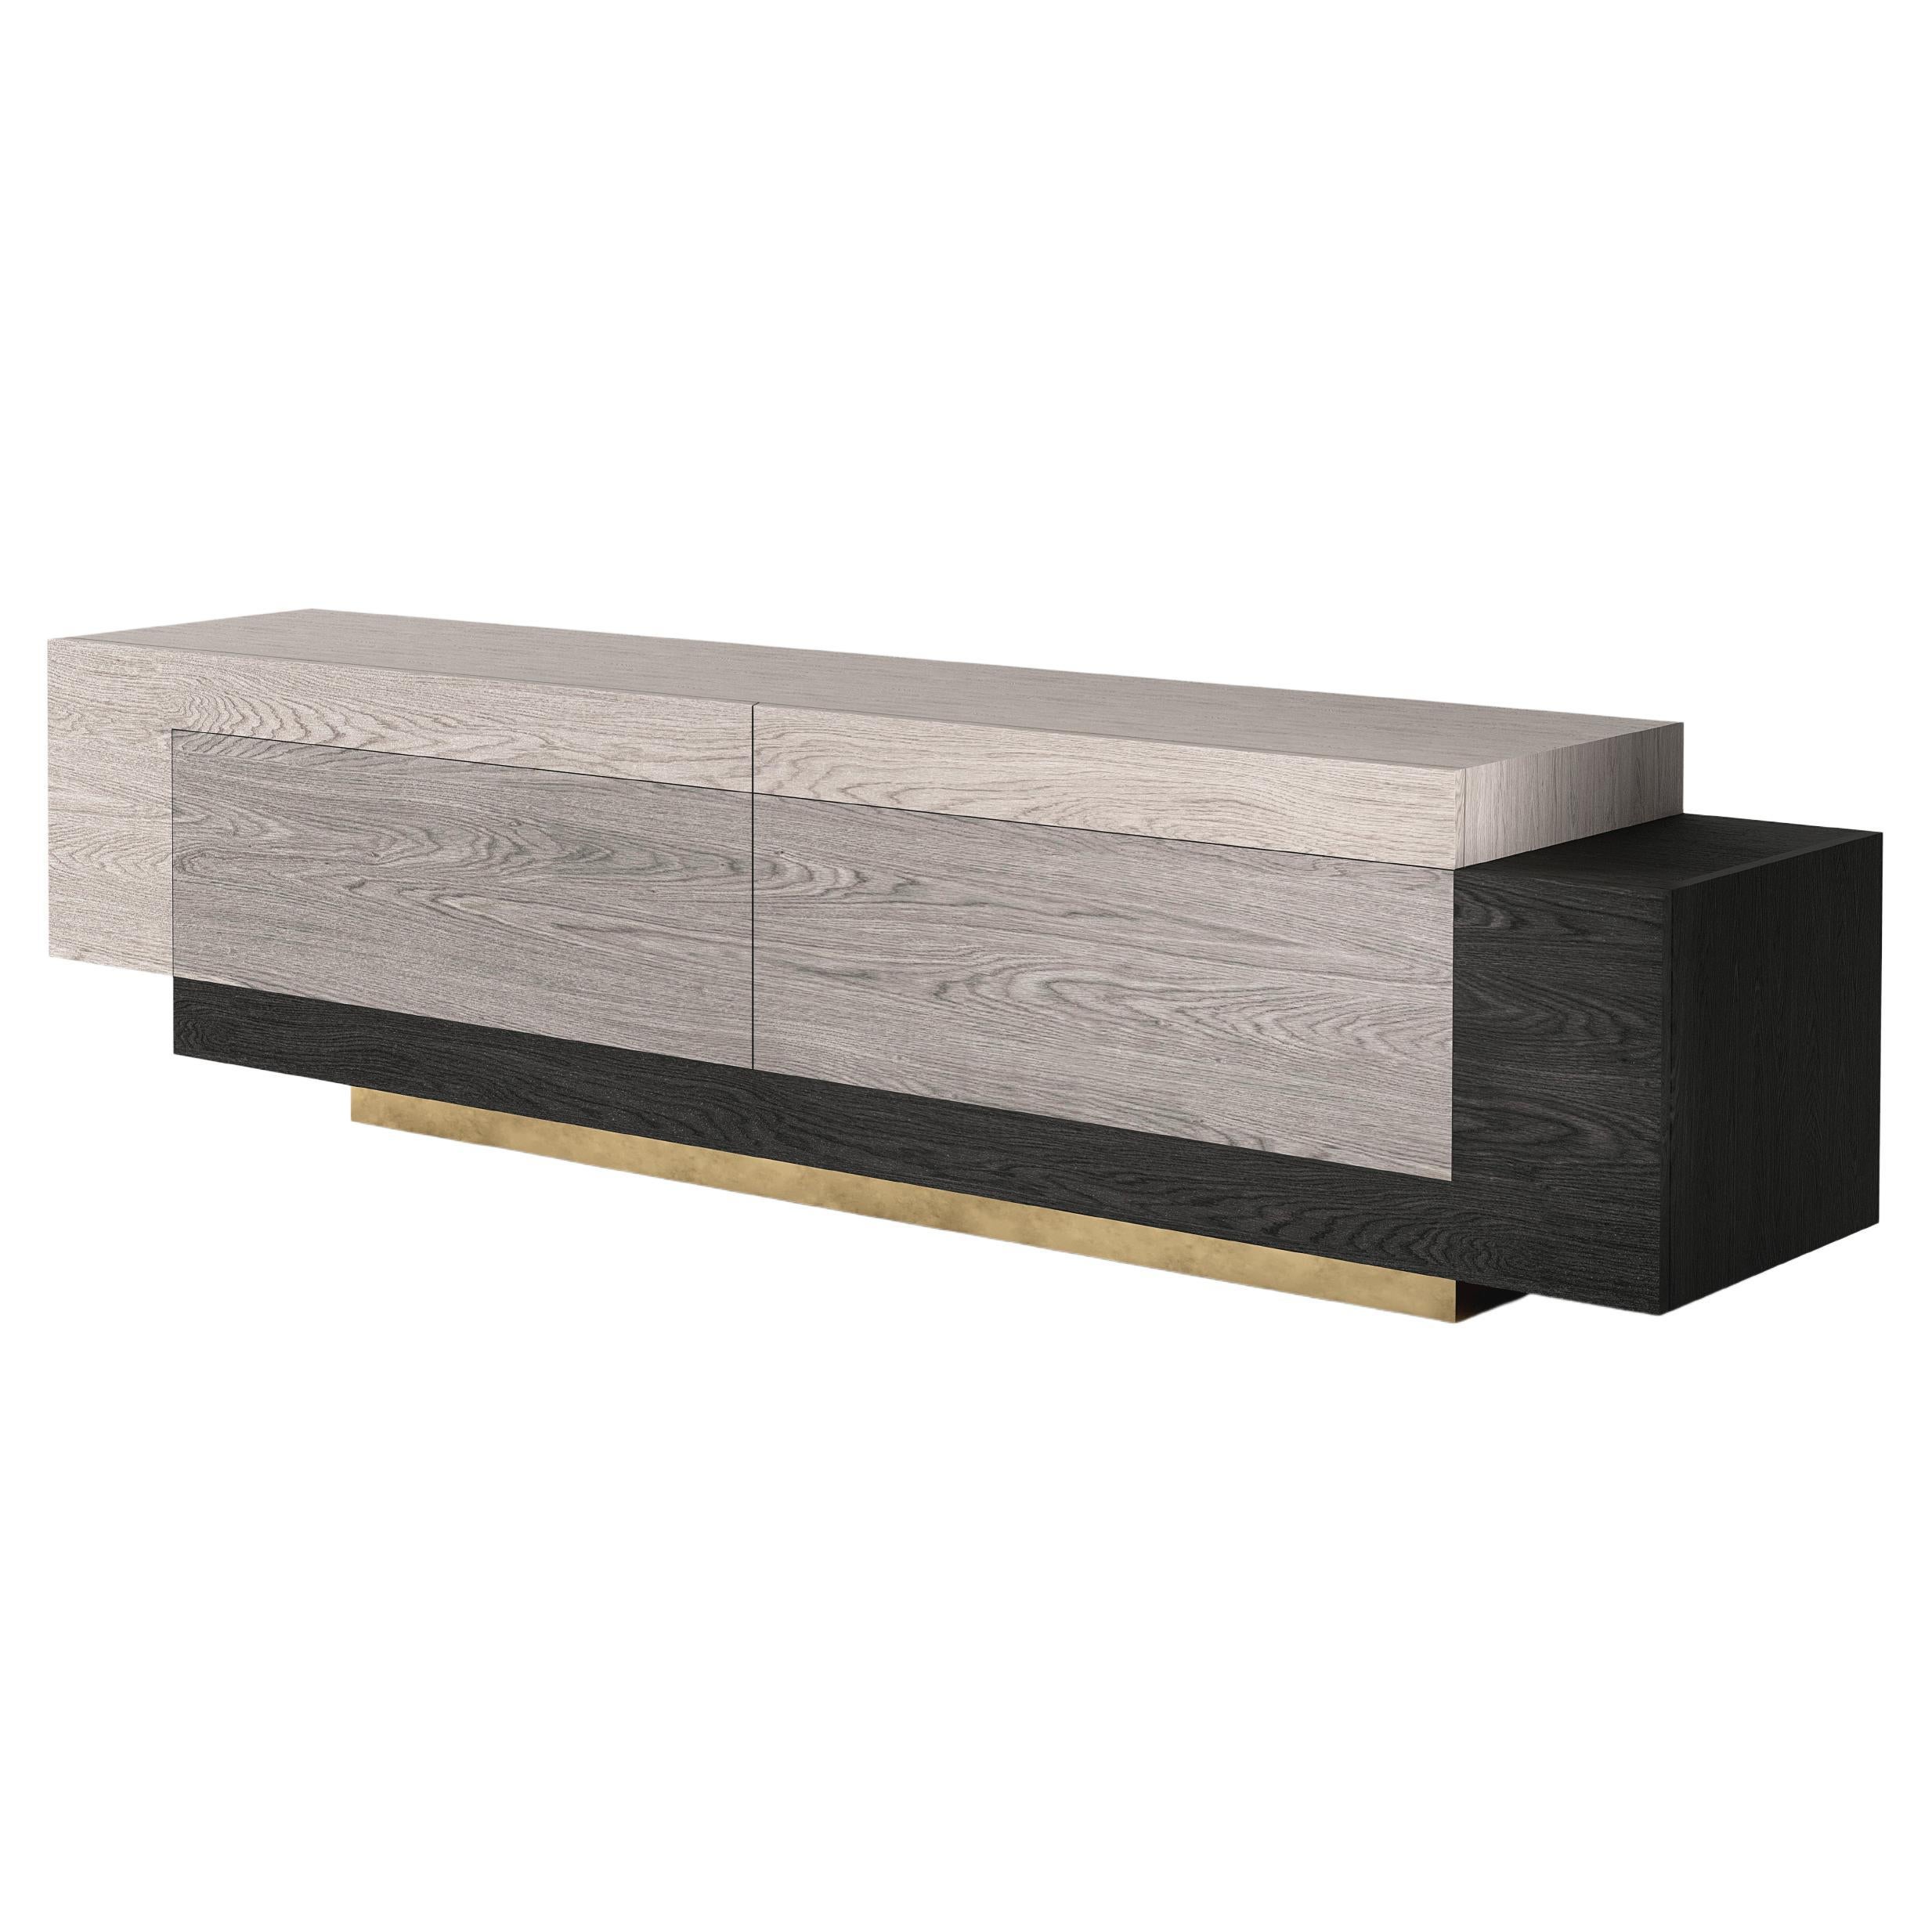 Booleanos Tv Stand, Entertainment Low Console in Dark Wood Veneer, Joel Escalona For Sale